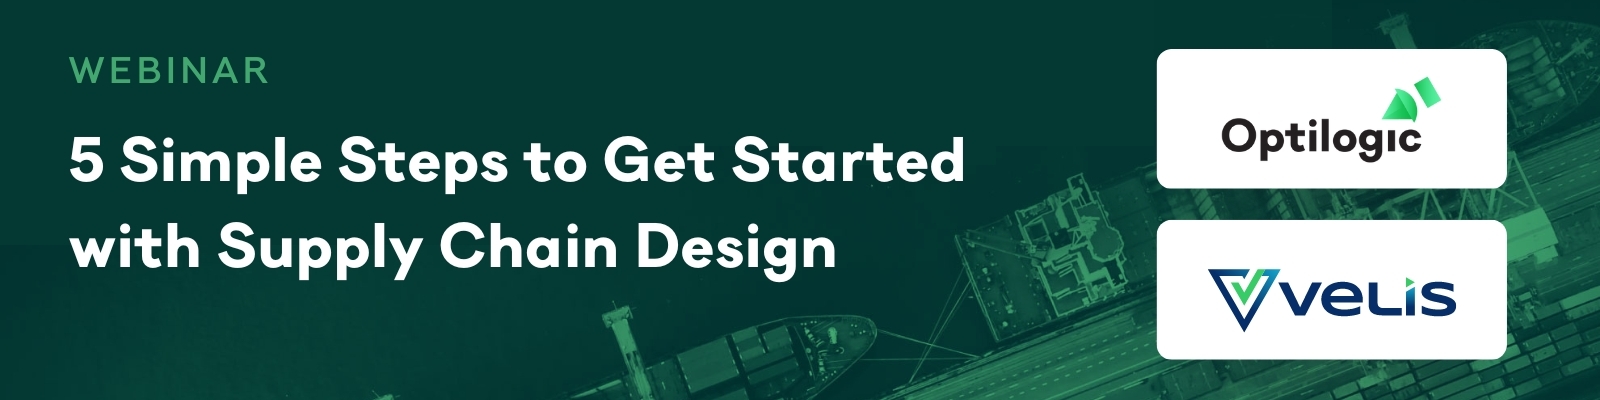 Watch: 5 Simple Steps to Get Started with Supply Chain Design